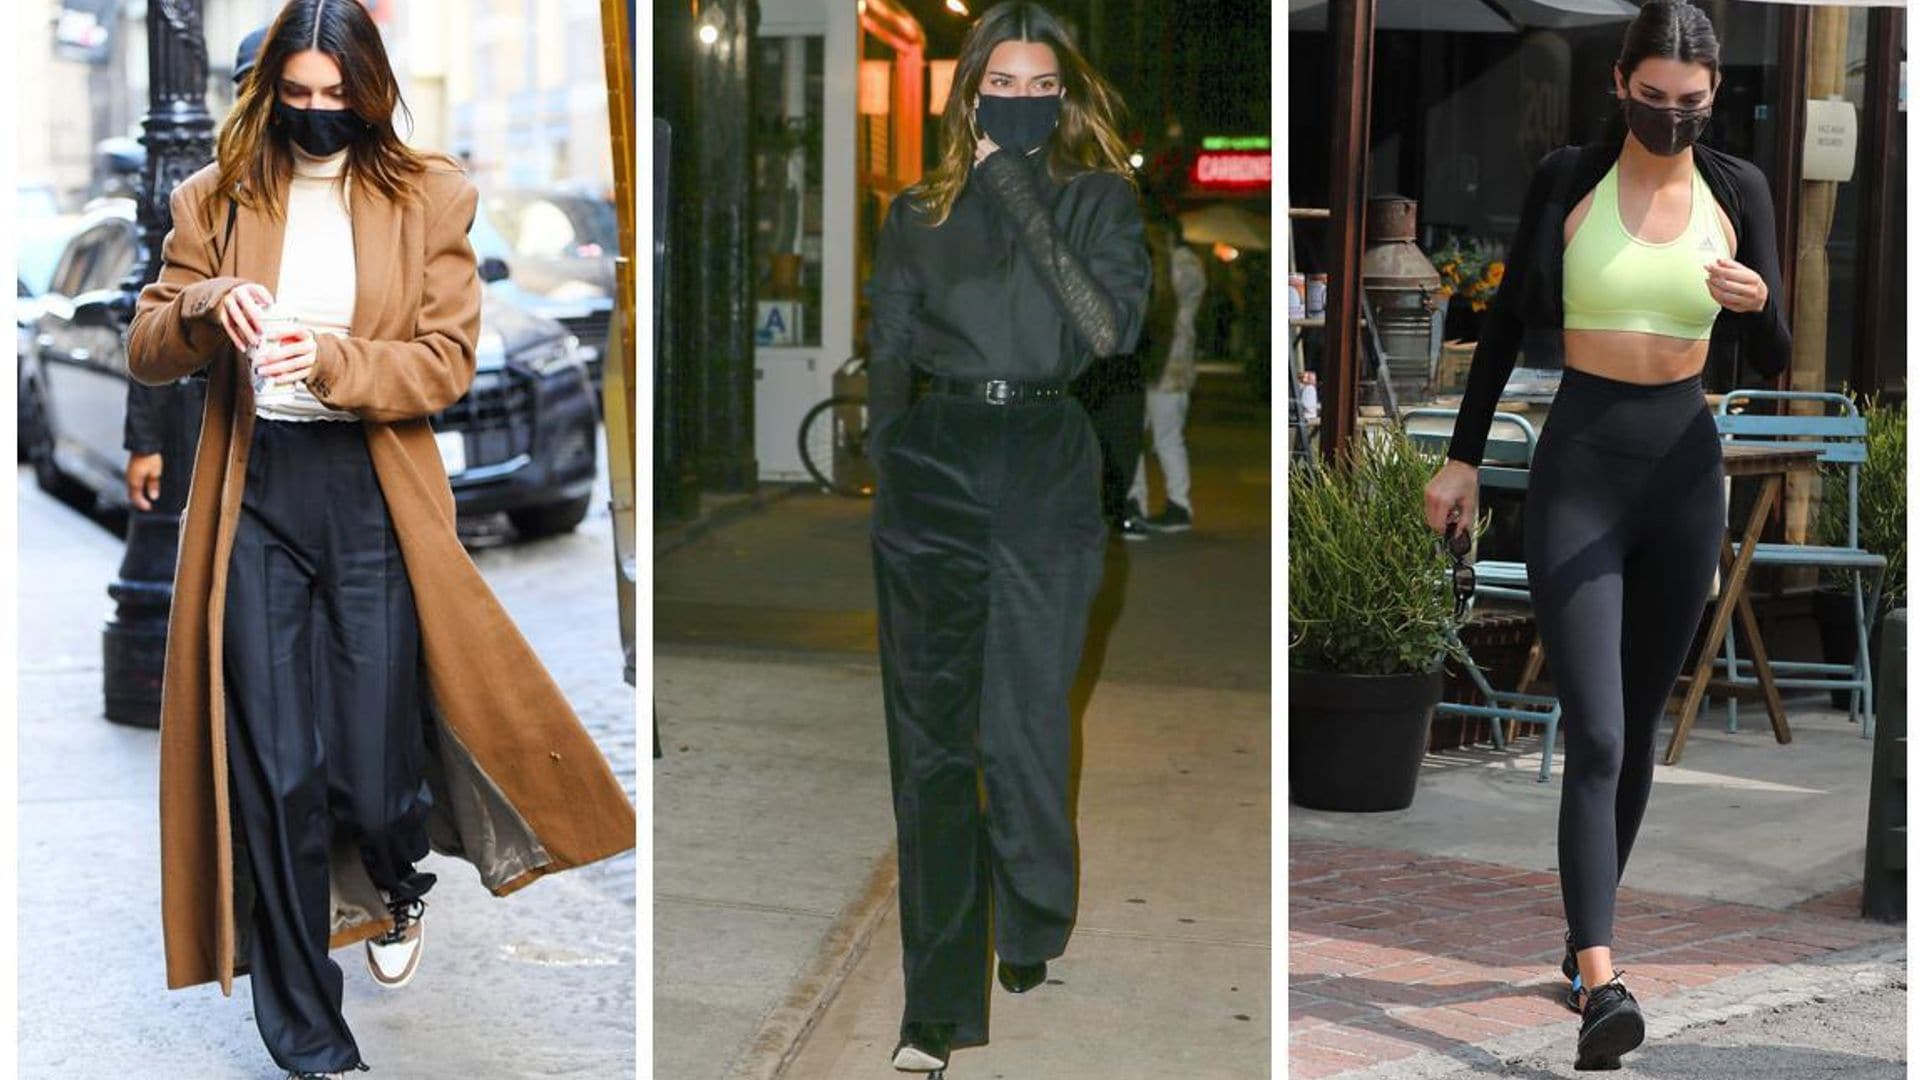 14 times Kendall Jenner made the streets her runway